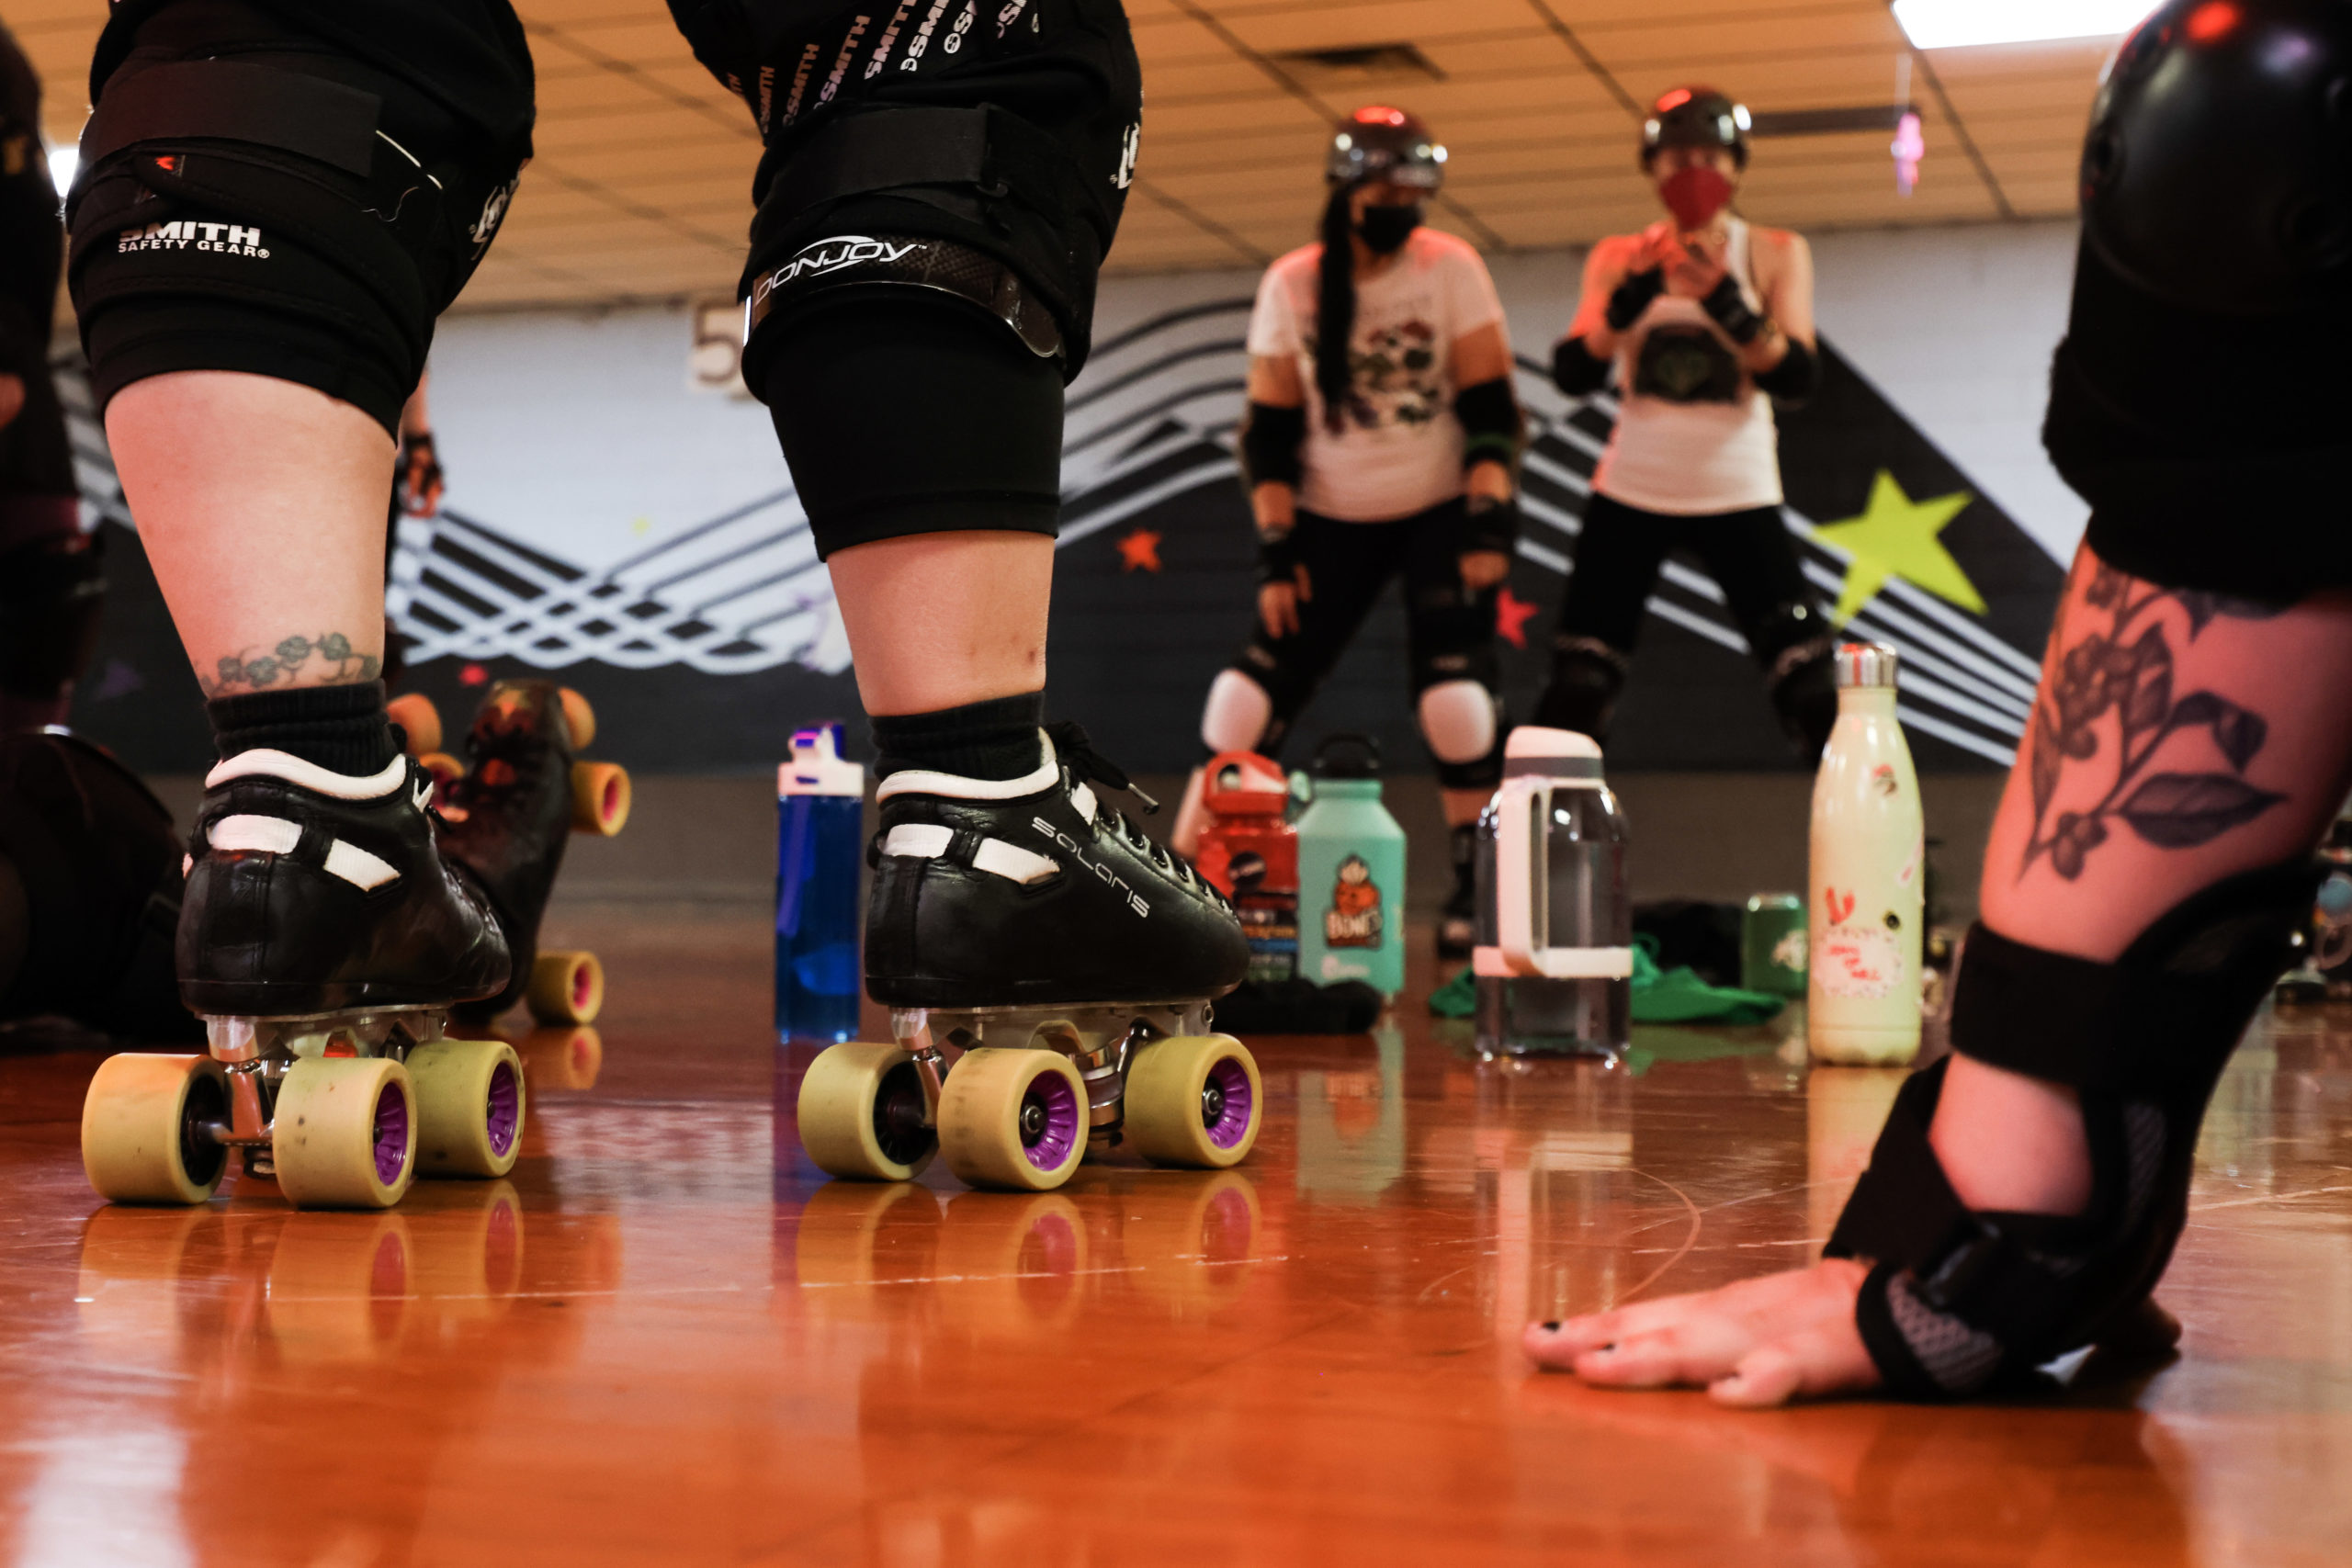 A close up photo of a roller derby skater’s roller skates and another skater’s hands. Both skaters watch coaches in the background explaining a drill at roller derby practice.